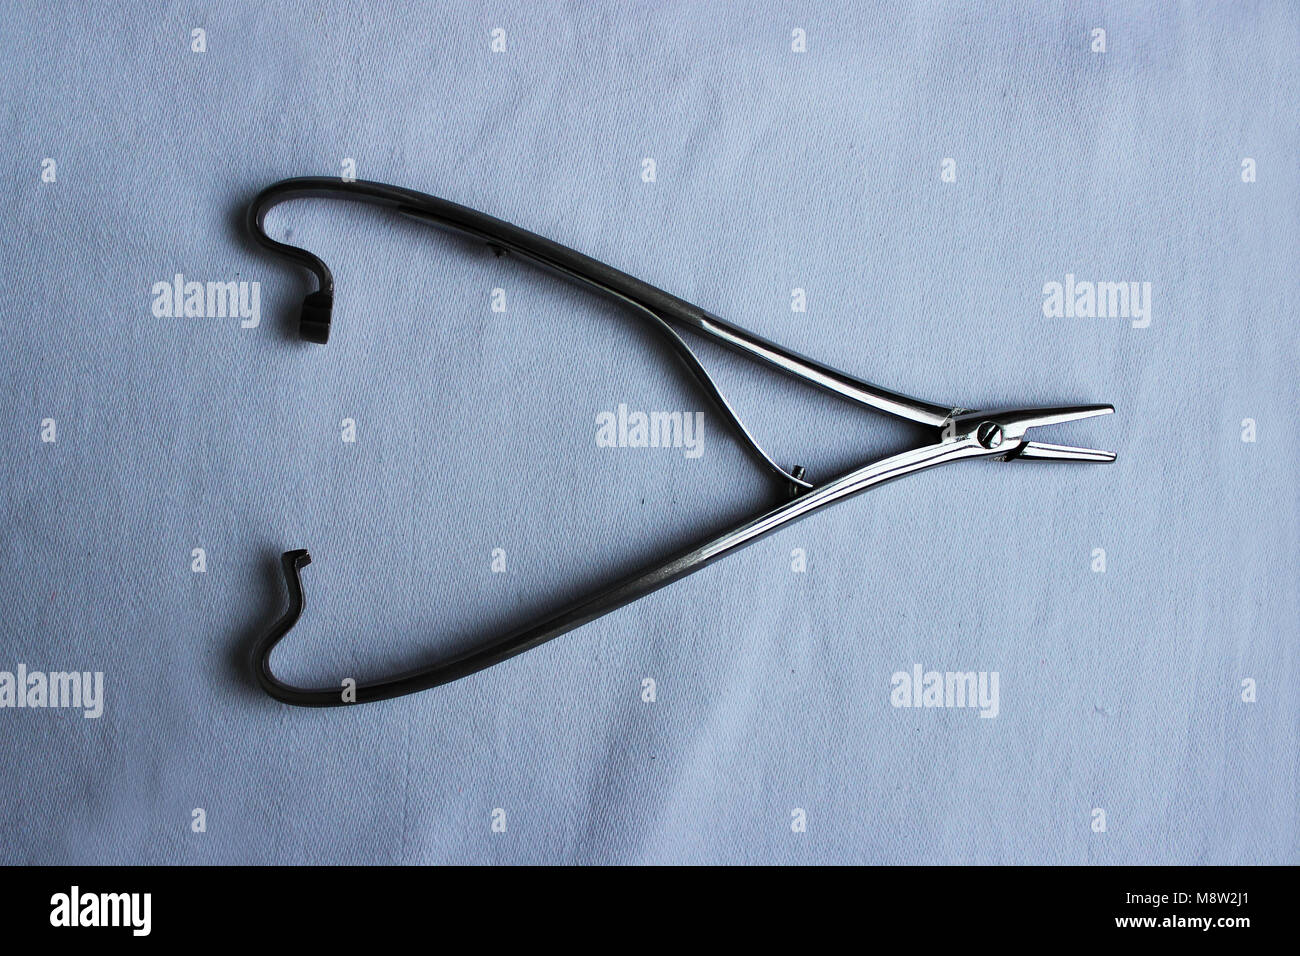 Medical instrument one needle holder lies on a blue cloth Stock Photo